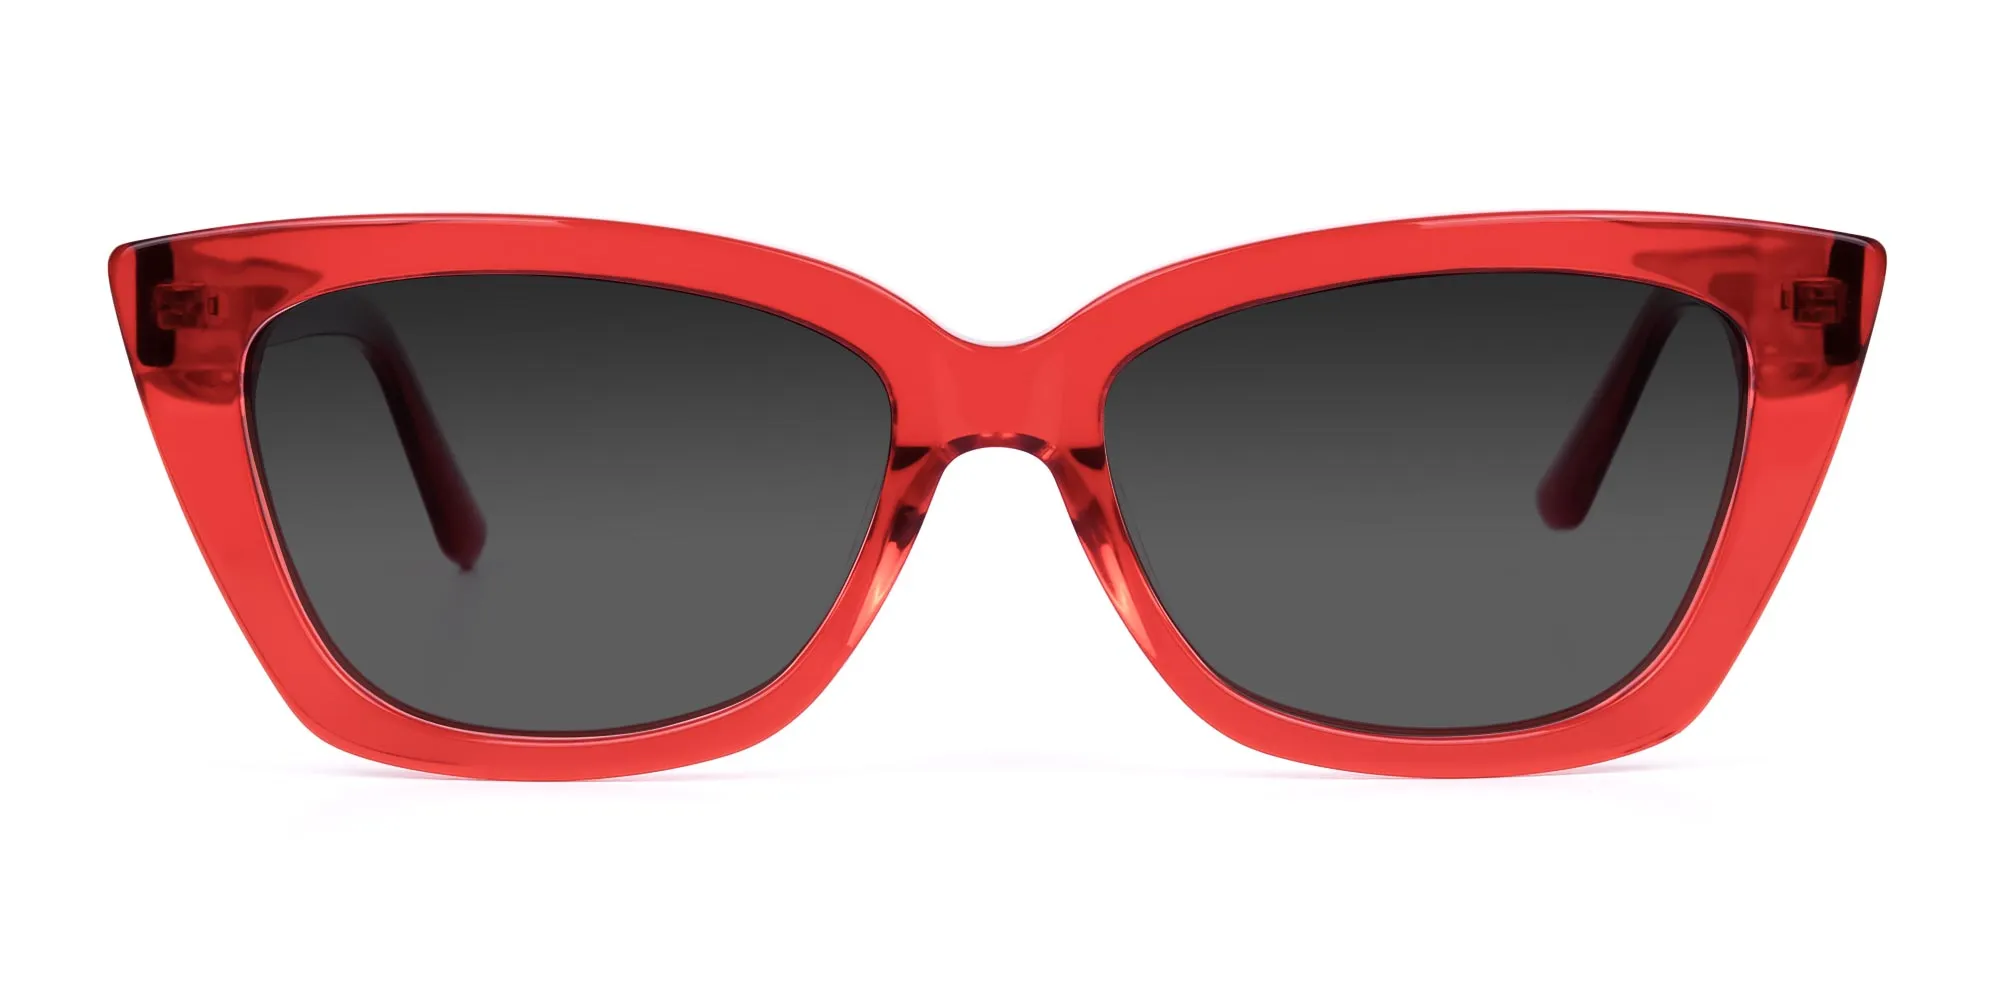 Red-Big-Cat-Eye-Sunglasses-with-Grey-Tint-2